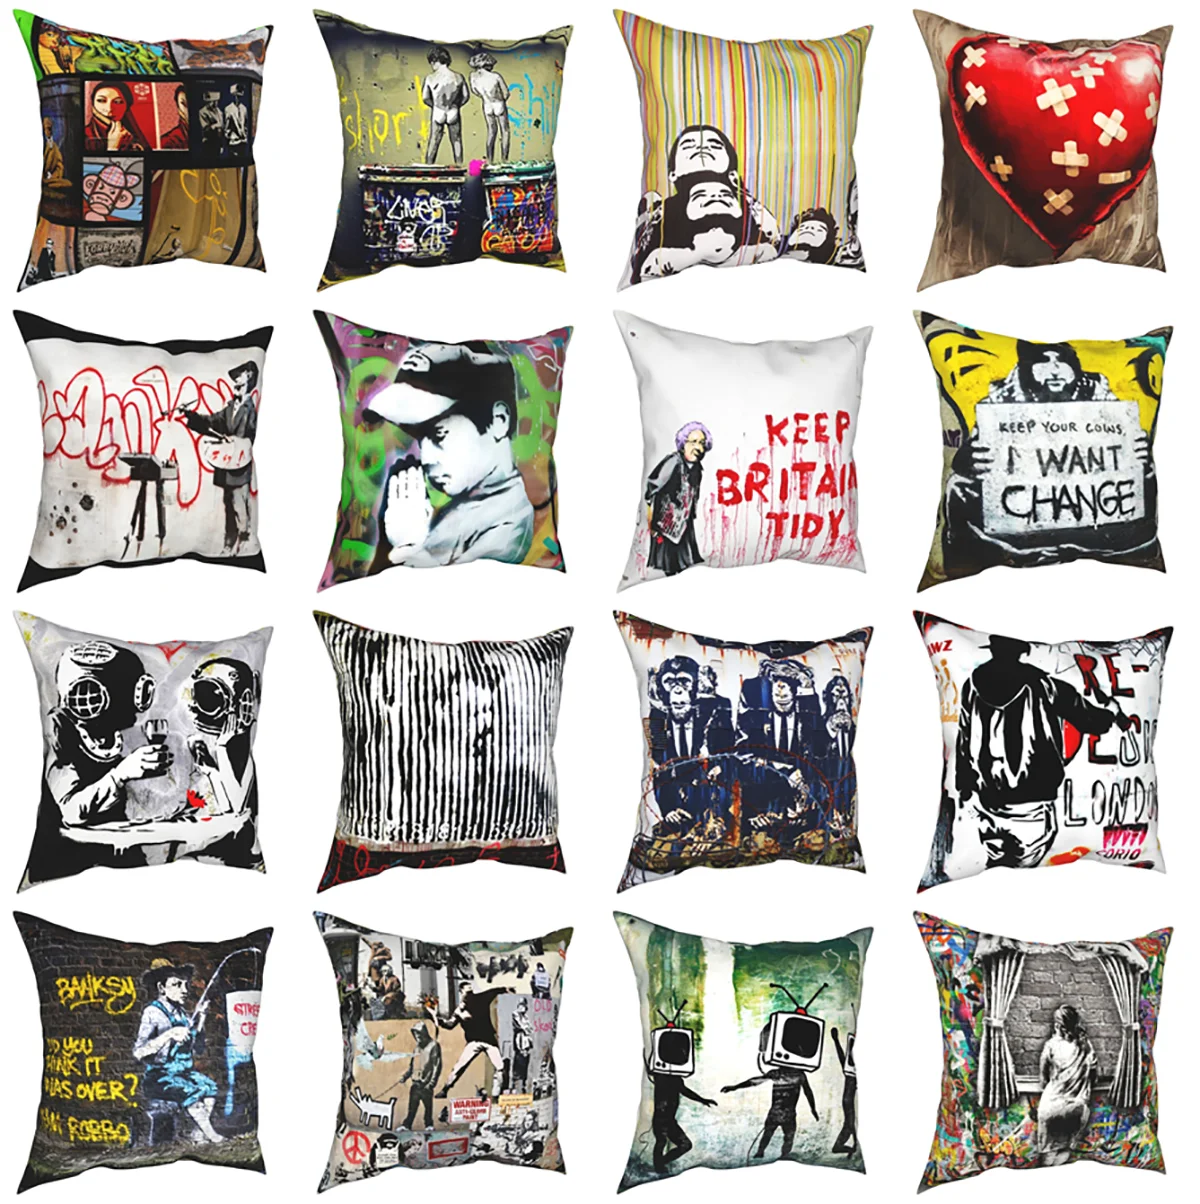 

Banksy Street Graffiti Art Pillowcase Cushion Cover Decoration Spray Paint Commentary Throw Pillow Case Cover Bedroom 45*45cm